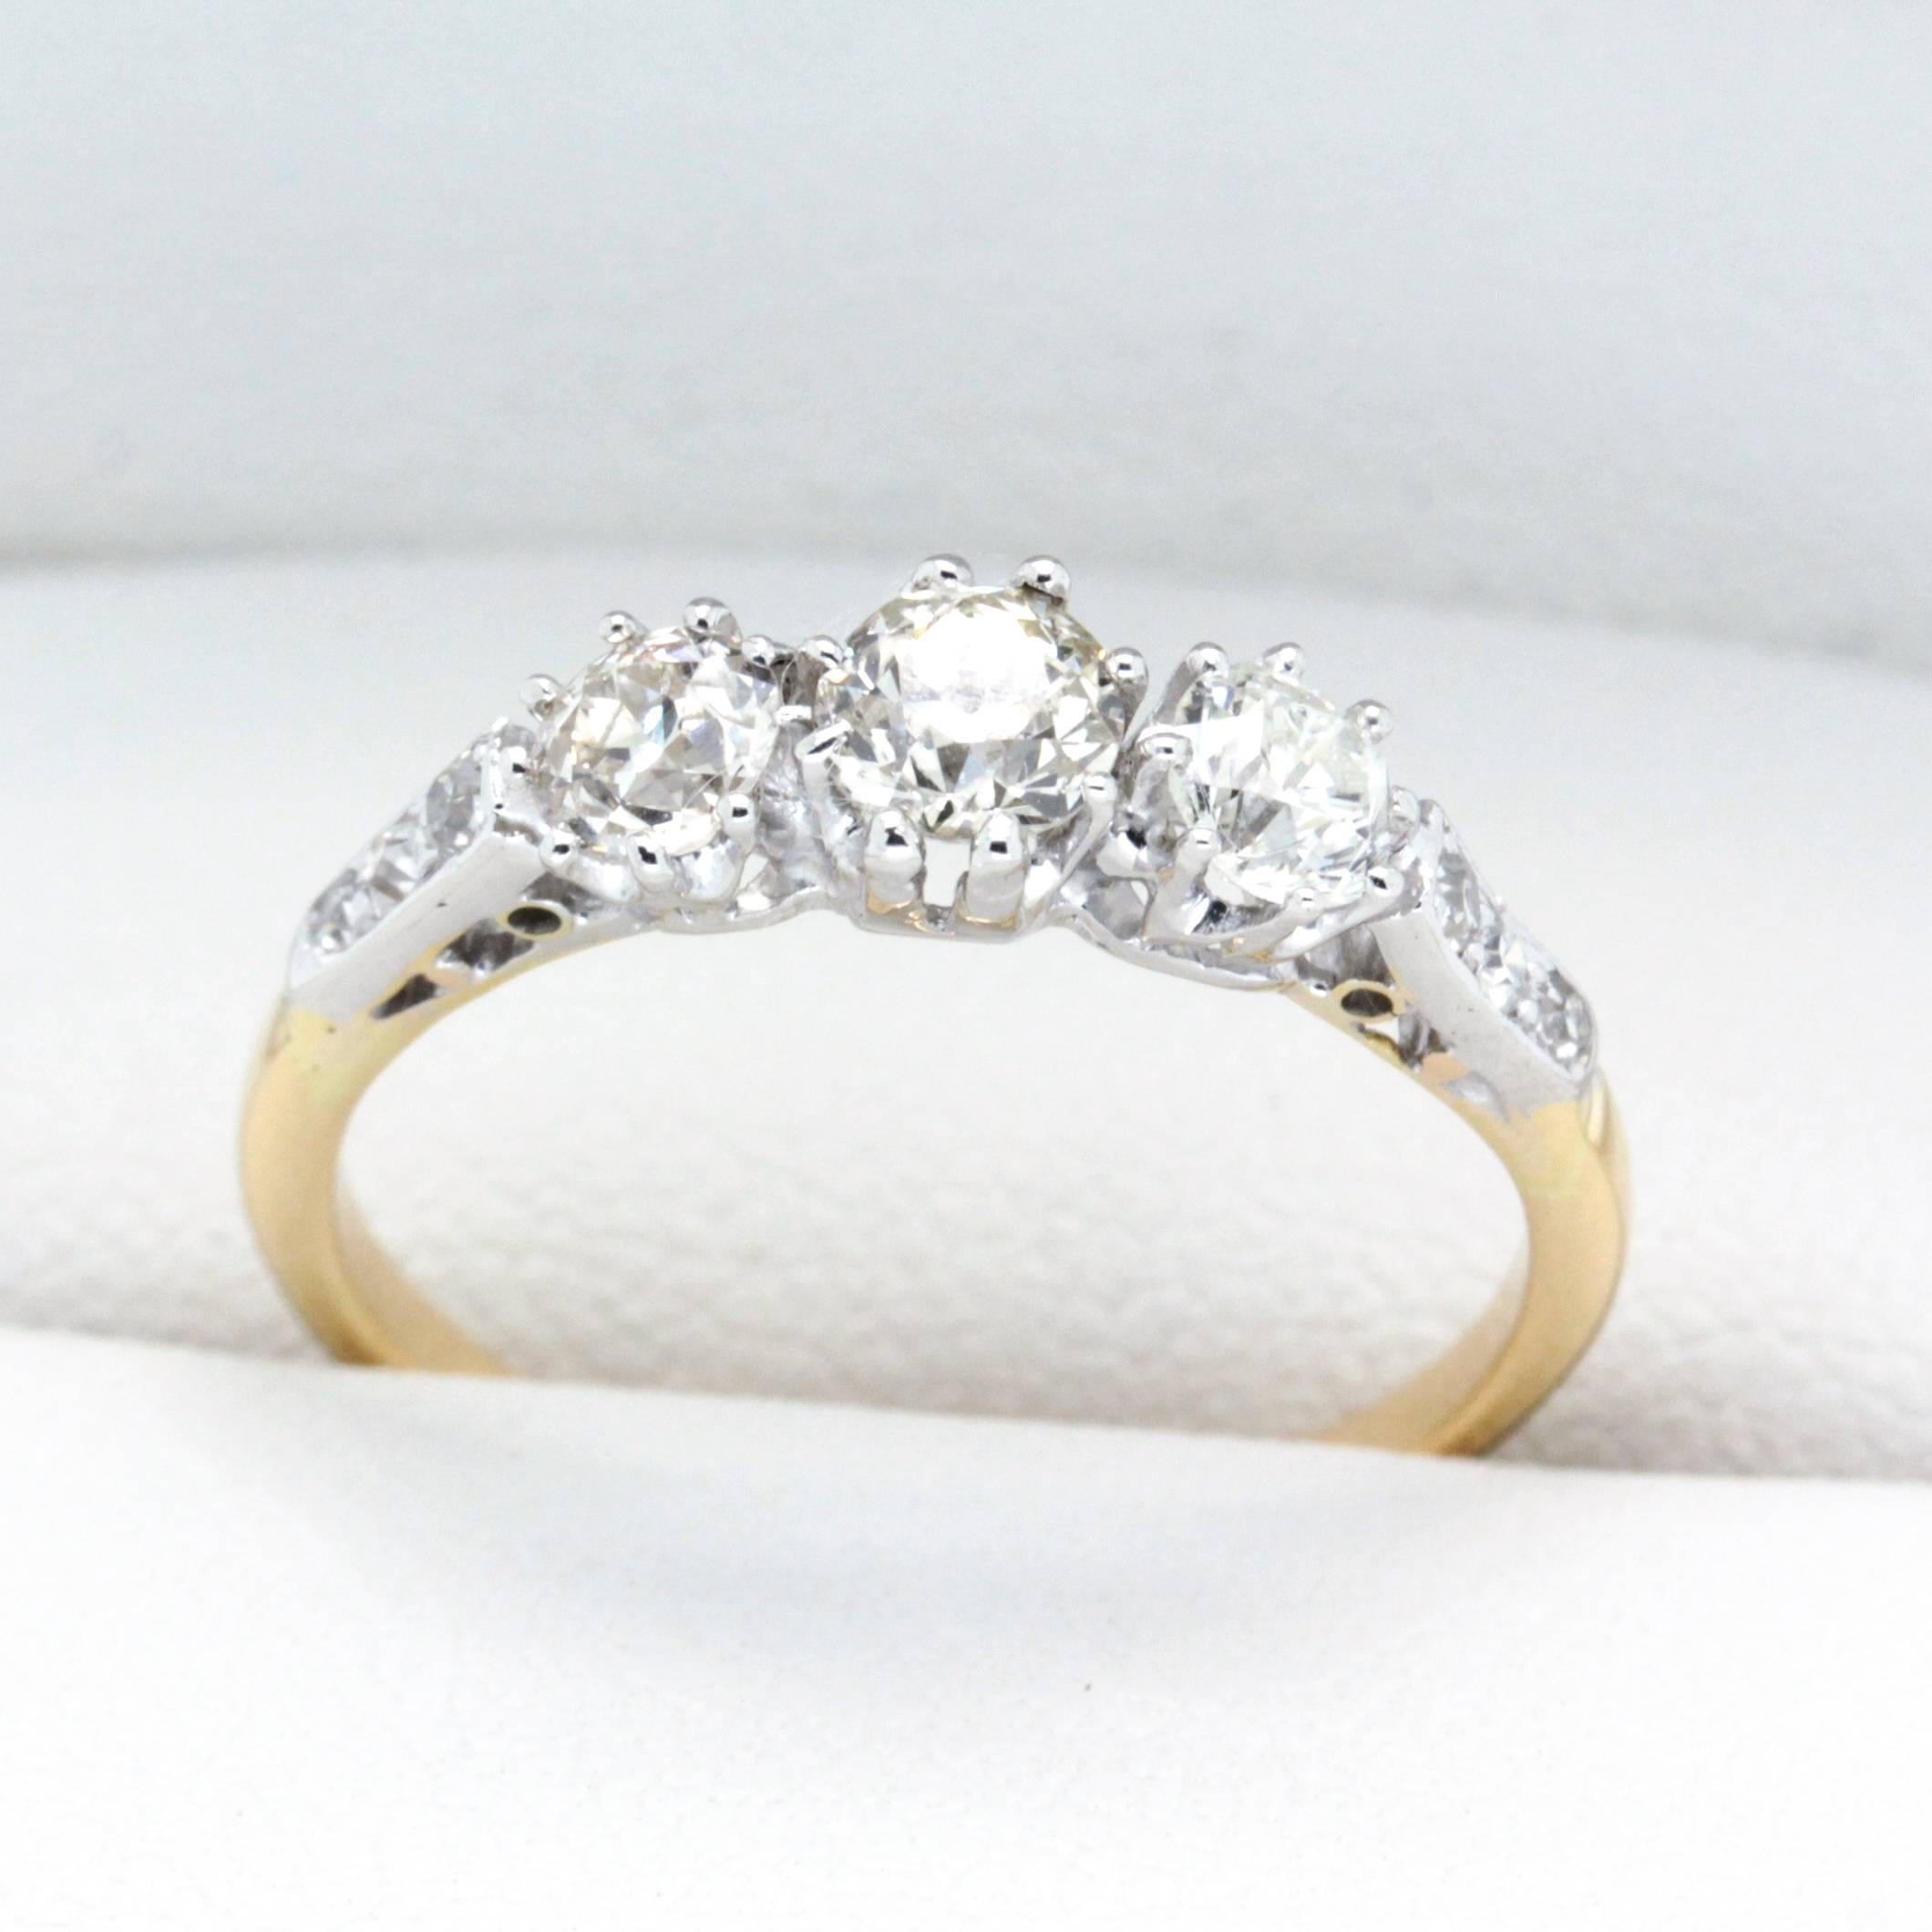 Art Deco Three-Diamond Engagement or Cocktail Ring In Excellent Condition In Sydney CBD, AU